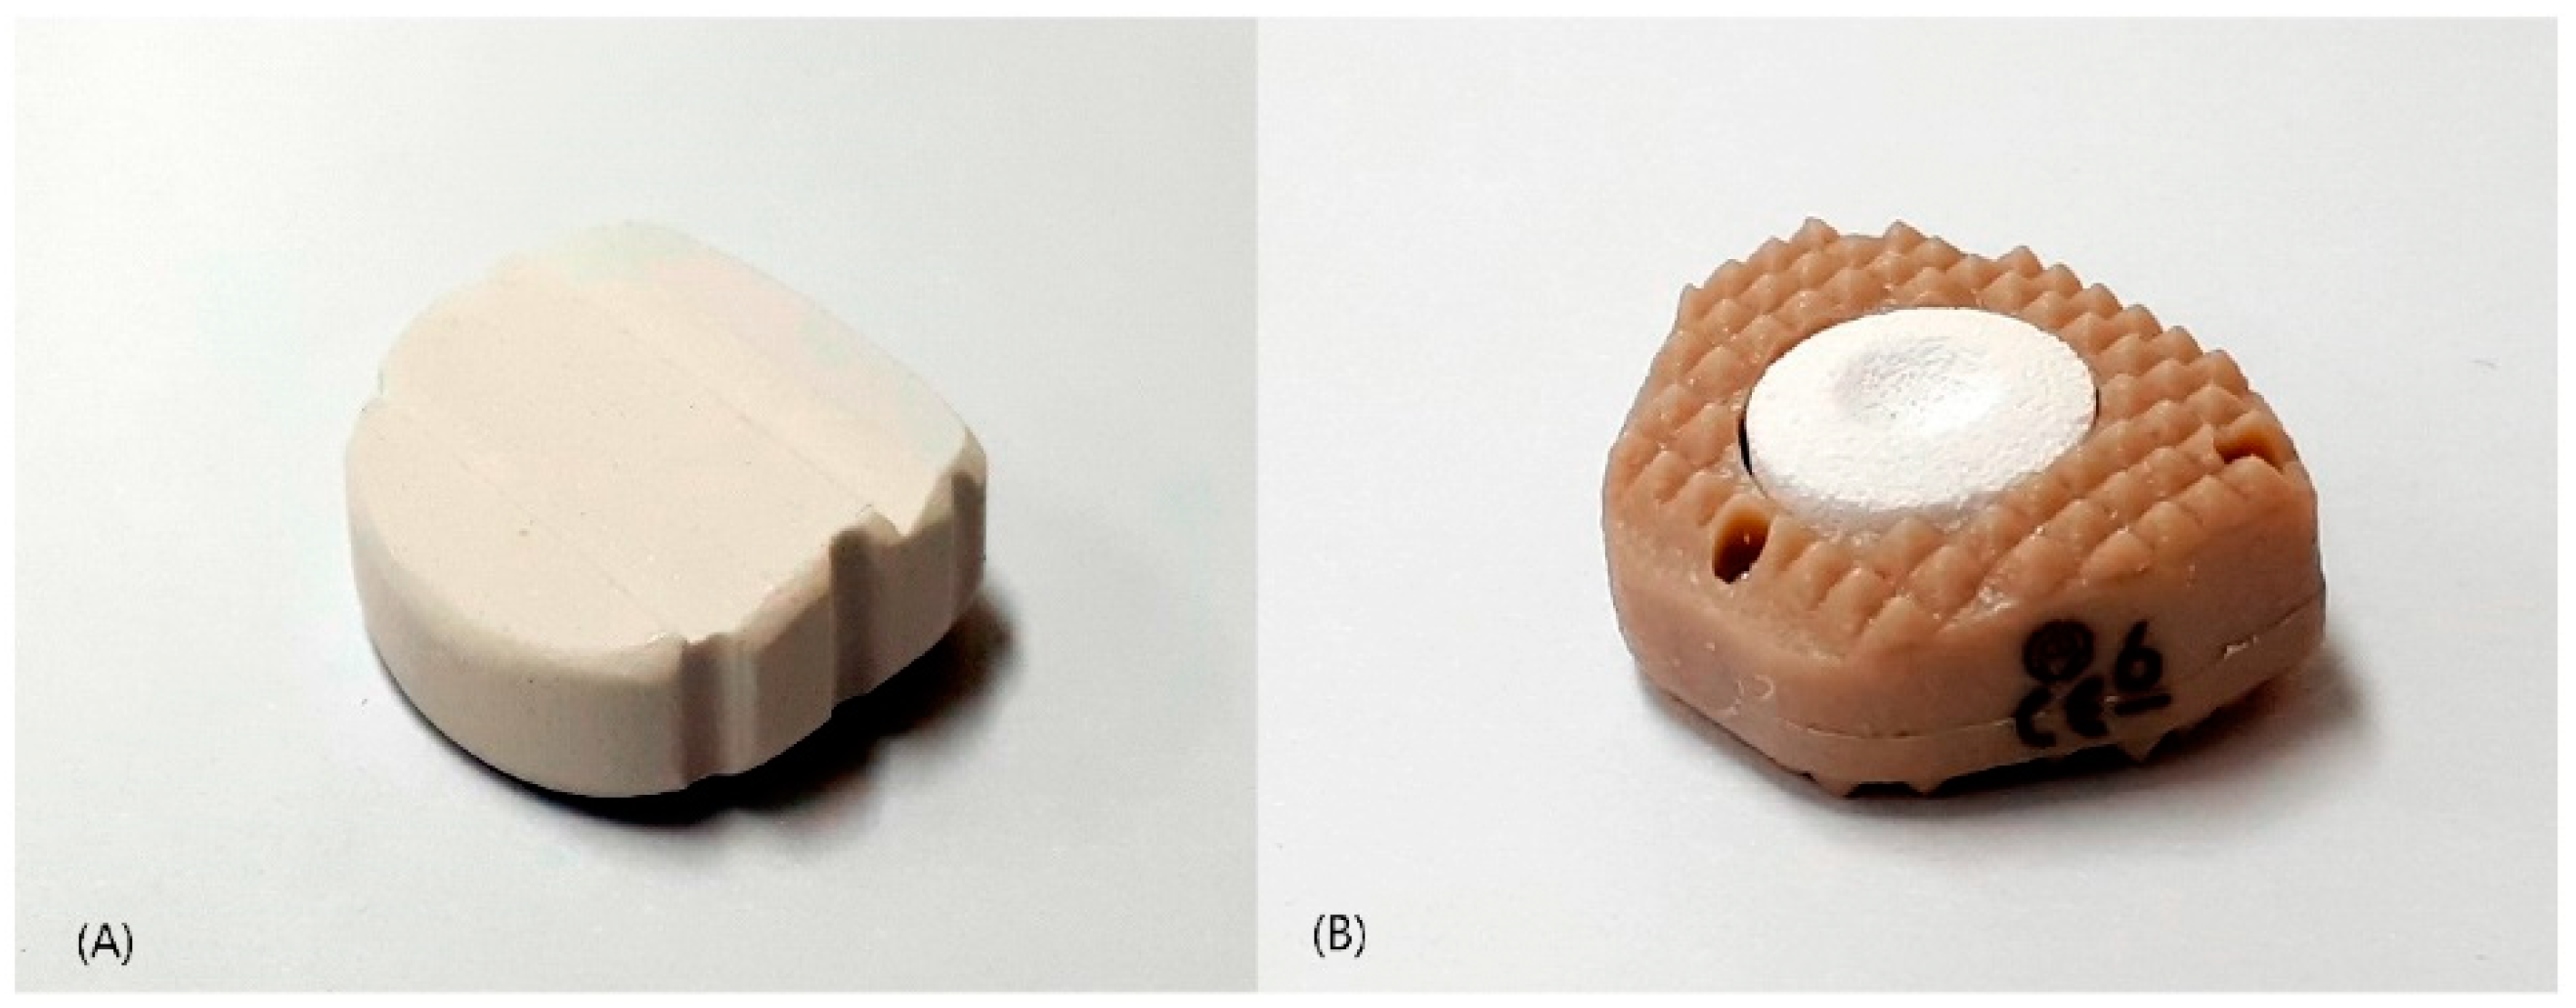 JCM | Free Full-Text | Anterior Cervical Discectomy and Fusion Performed  Using a CaO-SiO2-P2O5-B2O3 Bioactive Glass Ceramic or Polyetheretherketone  Cage Filled with Hydroxyapatite/&beta;-Tricalcium Phosphate: A Prospective  Randomized Controlled Trial